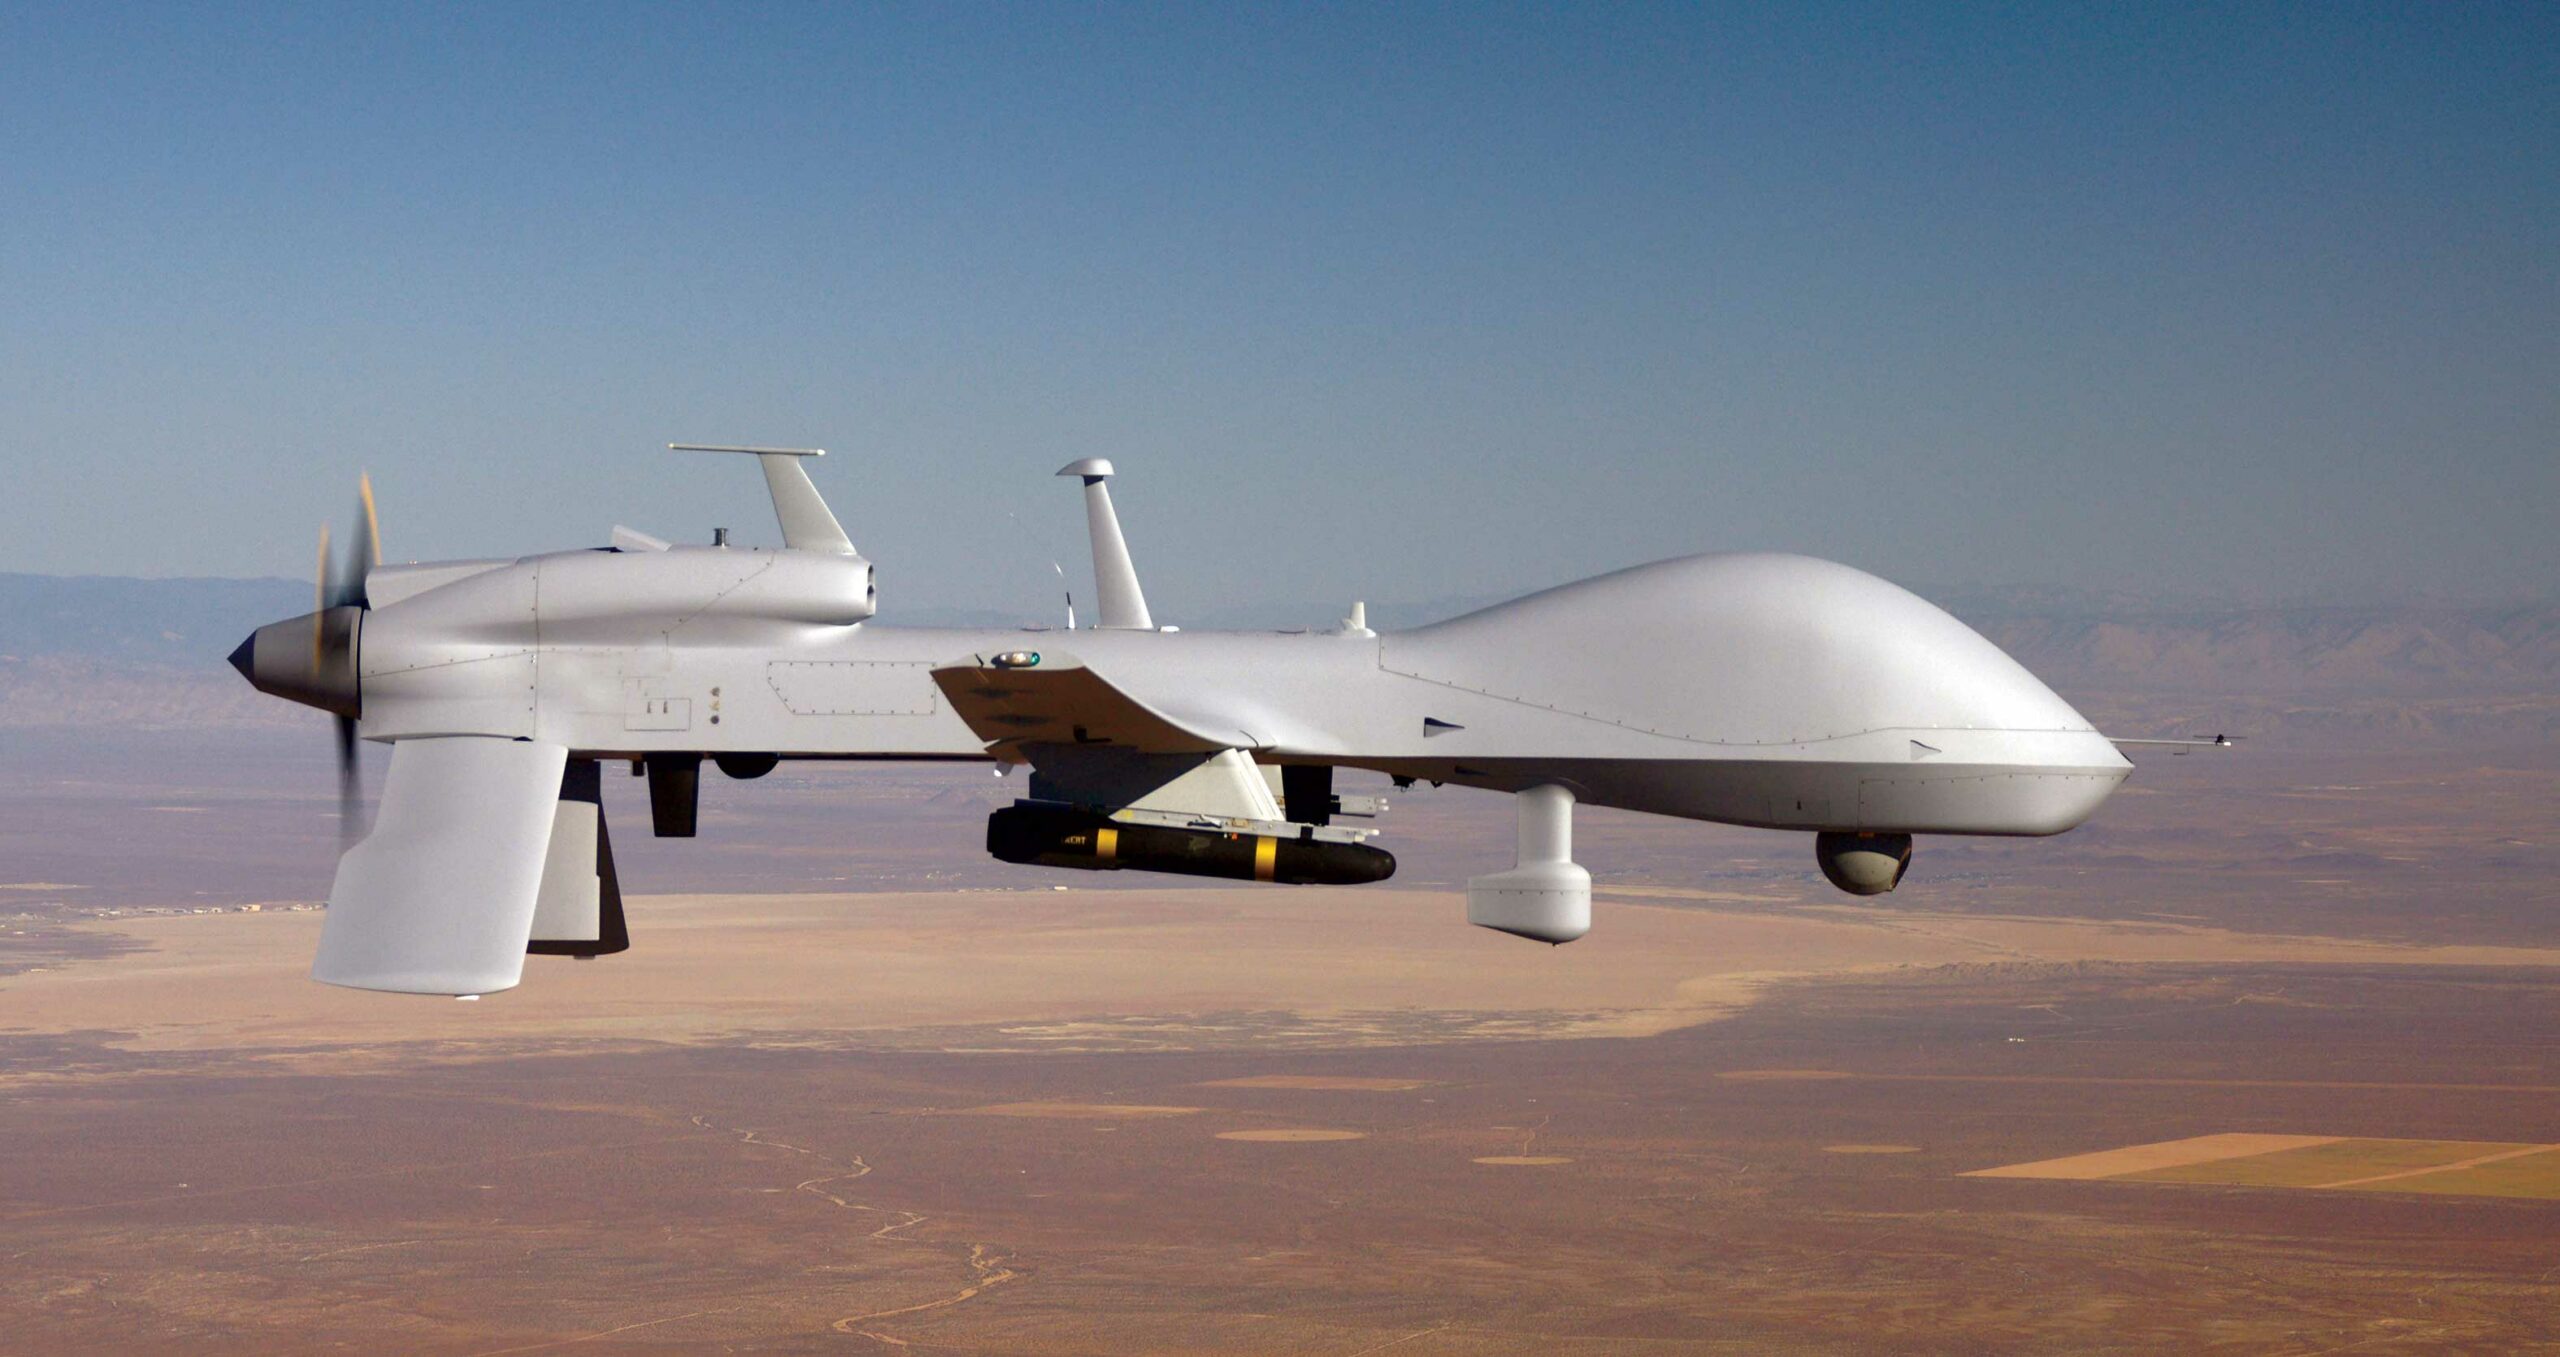 Ukrainian military created a kamikaze drone without waiting for MQ-1C Gray Eagle deliveries